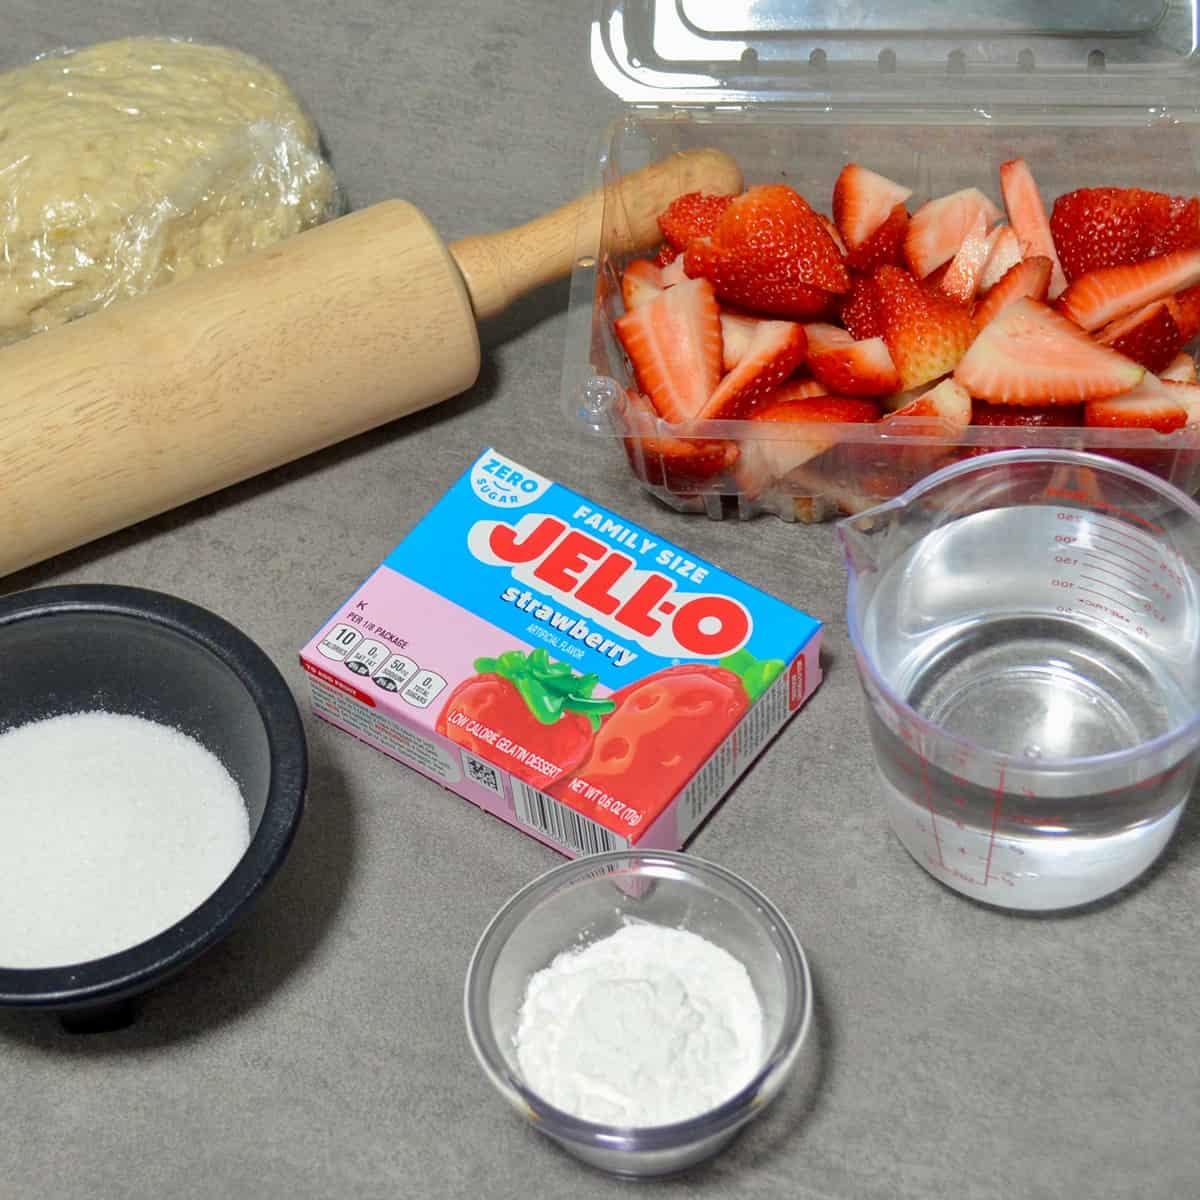 Jell-O mix, strawberries, and other baking ingredients